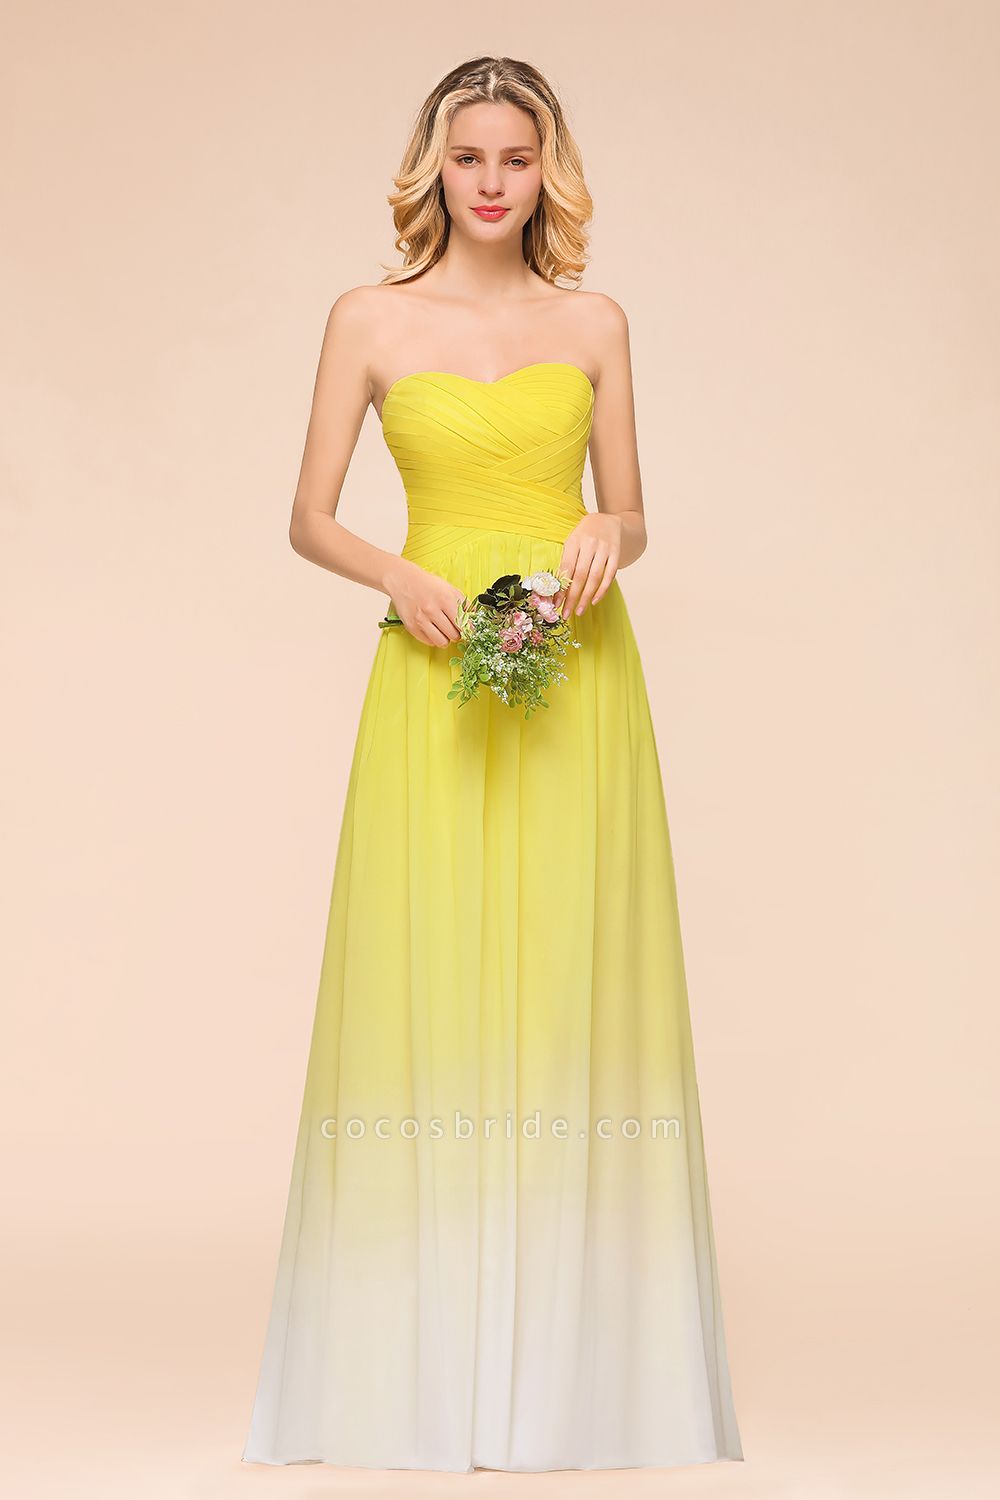 Pretty Strapless Backless A-line Floor-length Chiffon Ruched Bridesmaid Dress